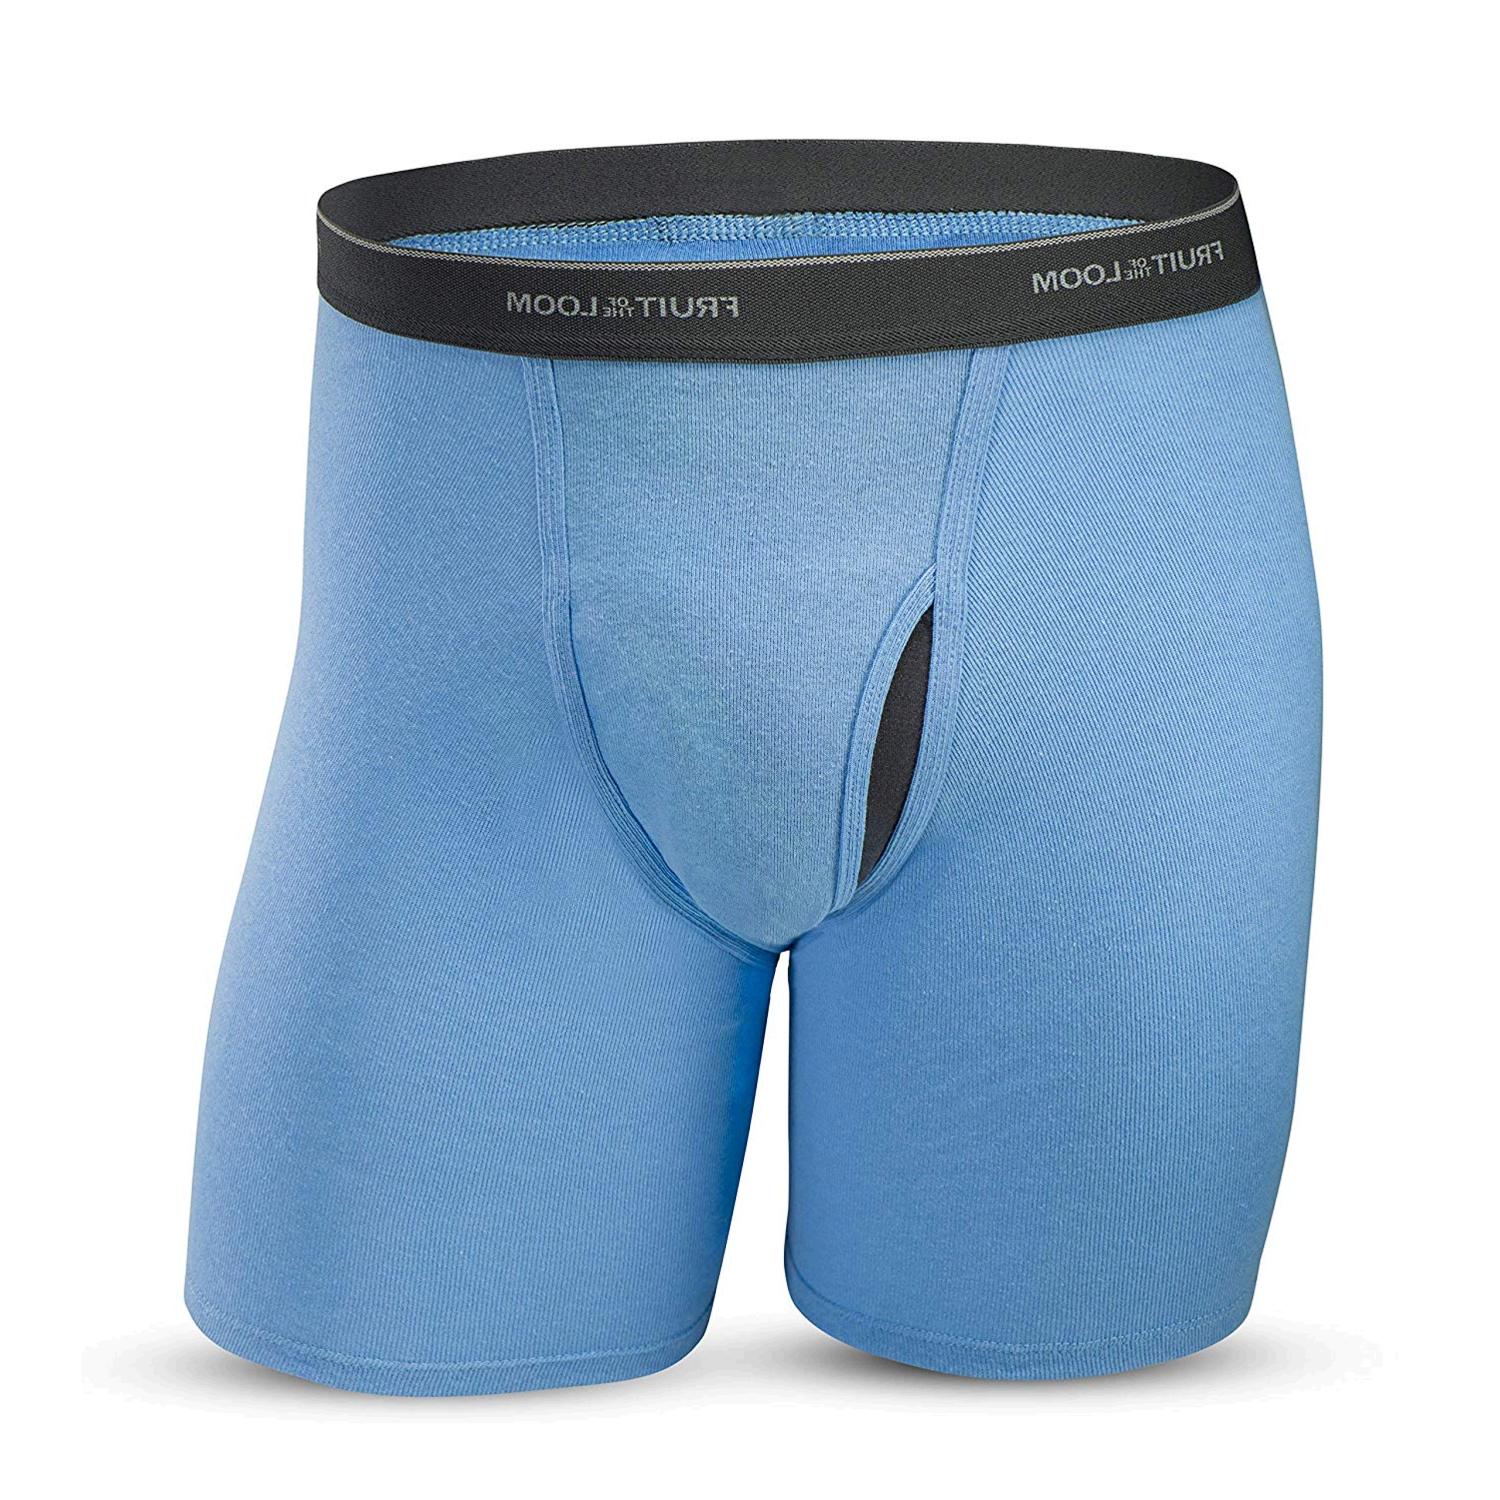 fruit of the loom mens boxer briefs